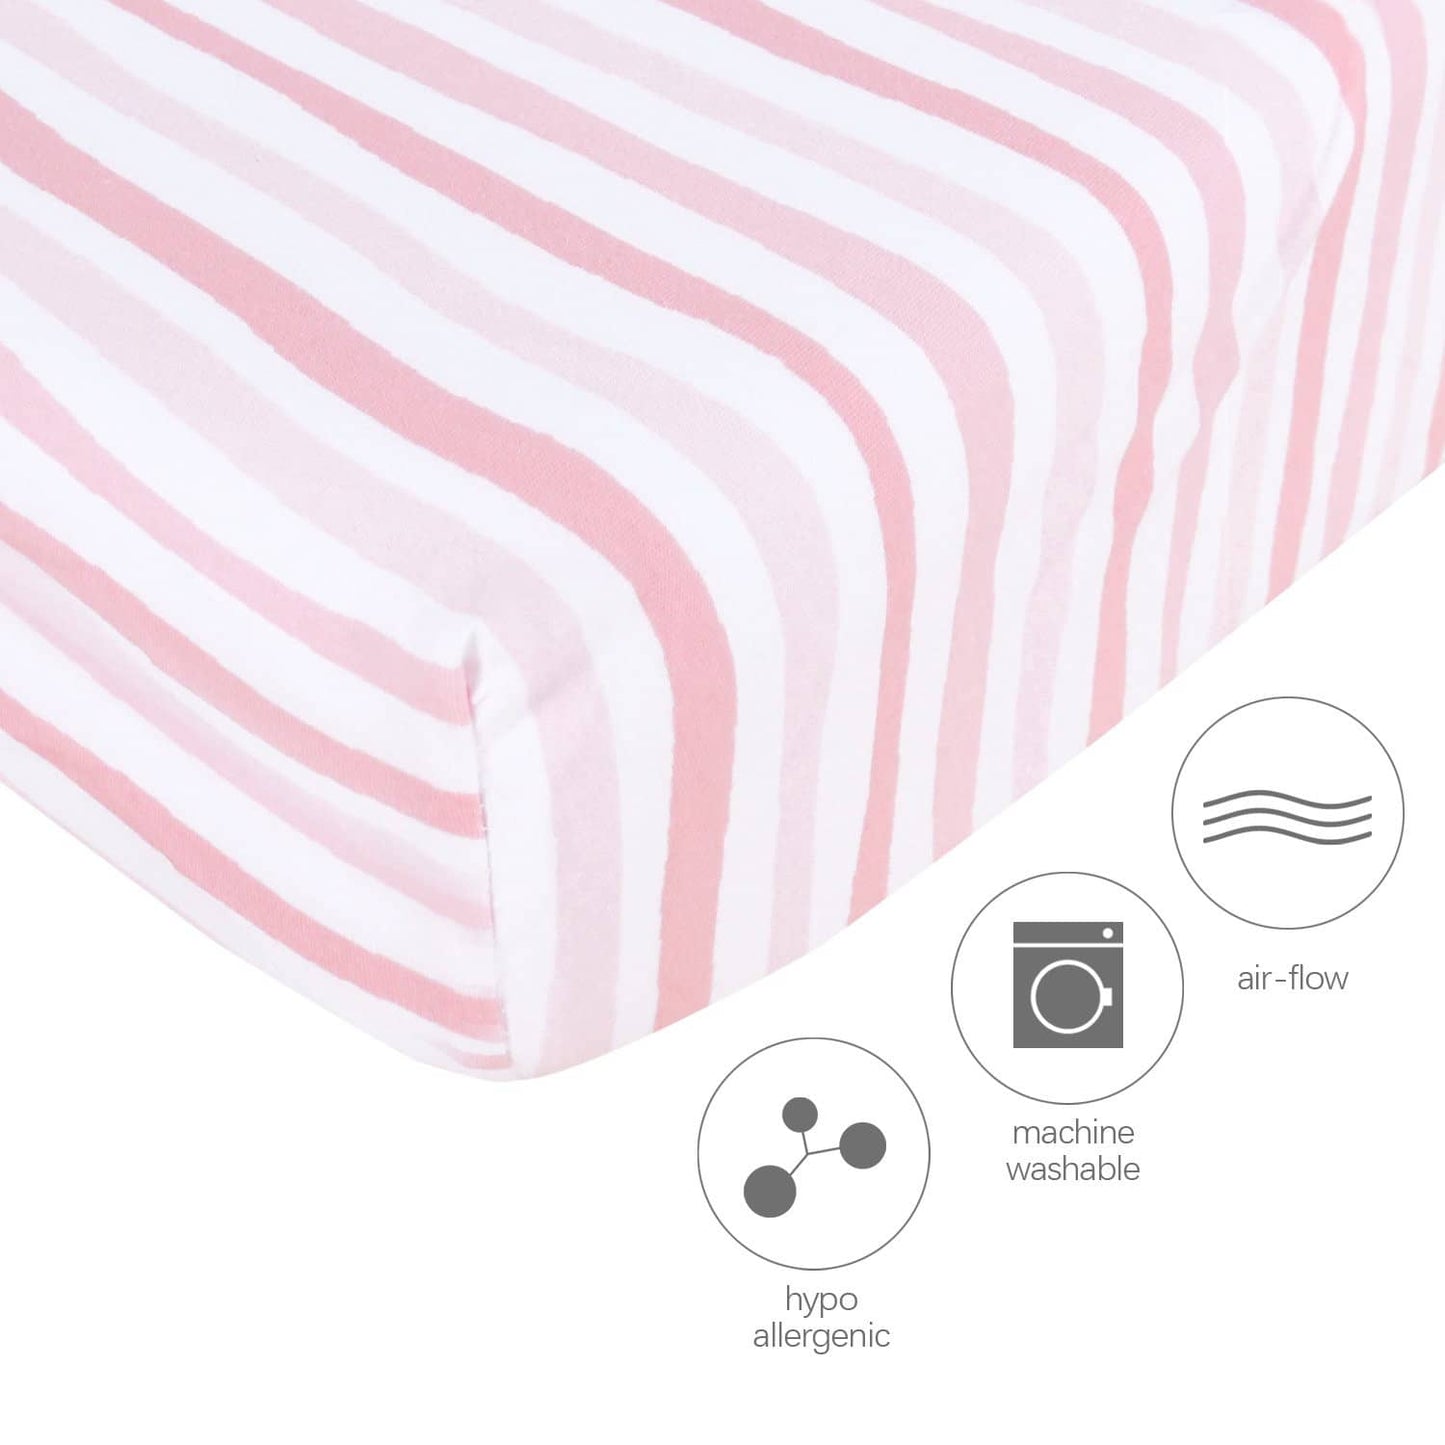 Pack n Play Fitted Sheets - 2 Pack Pink Print, Jersey Cotton (for Mini Crib 39''x27'') - Biloban Online Store